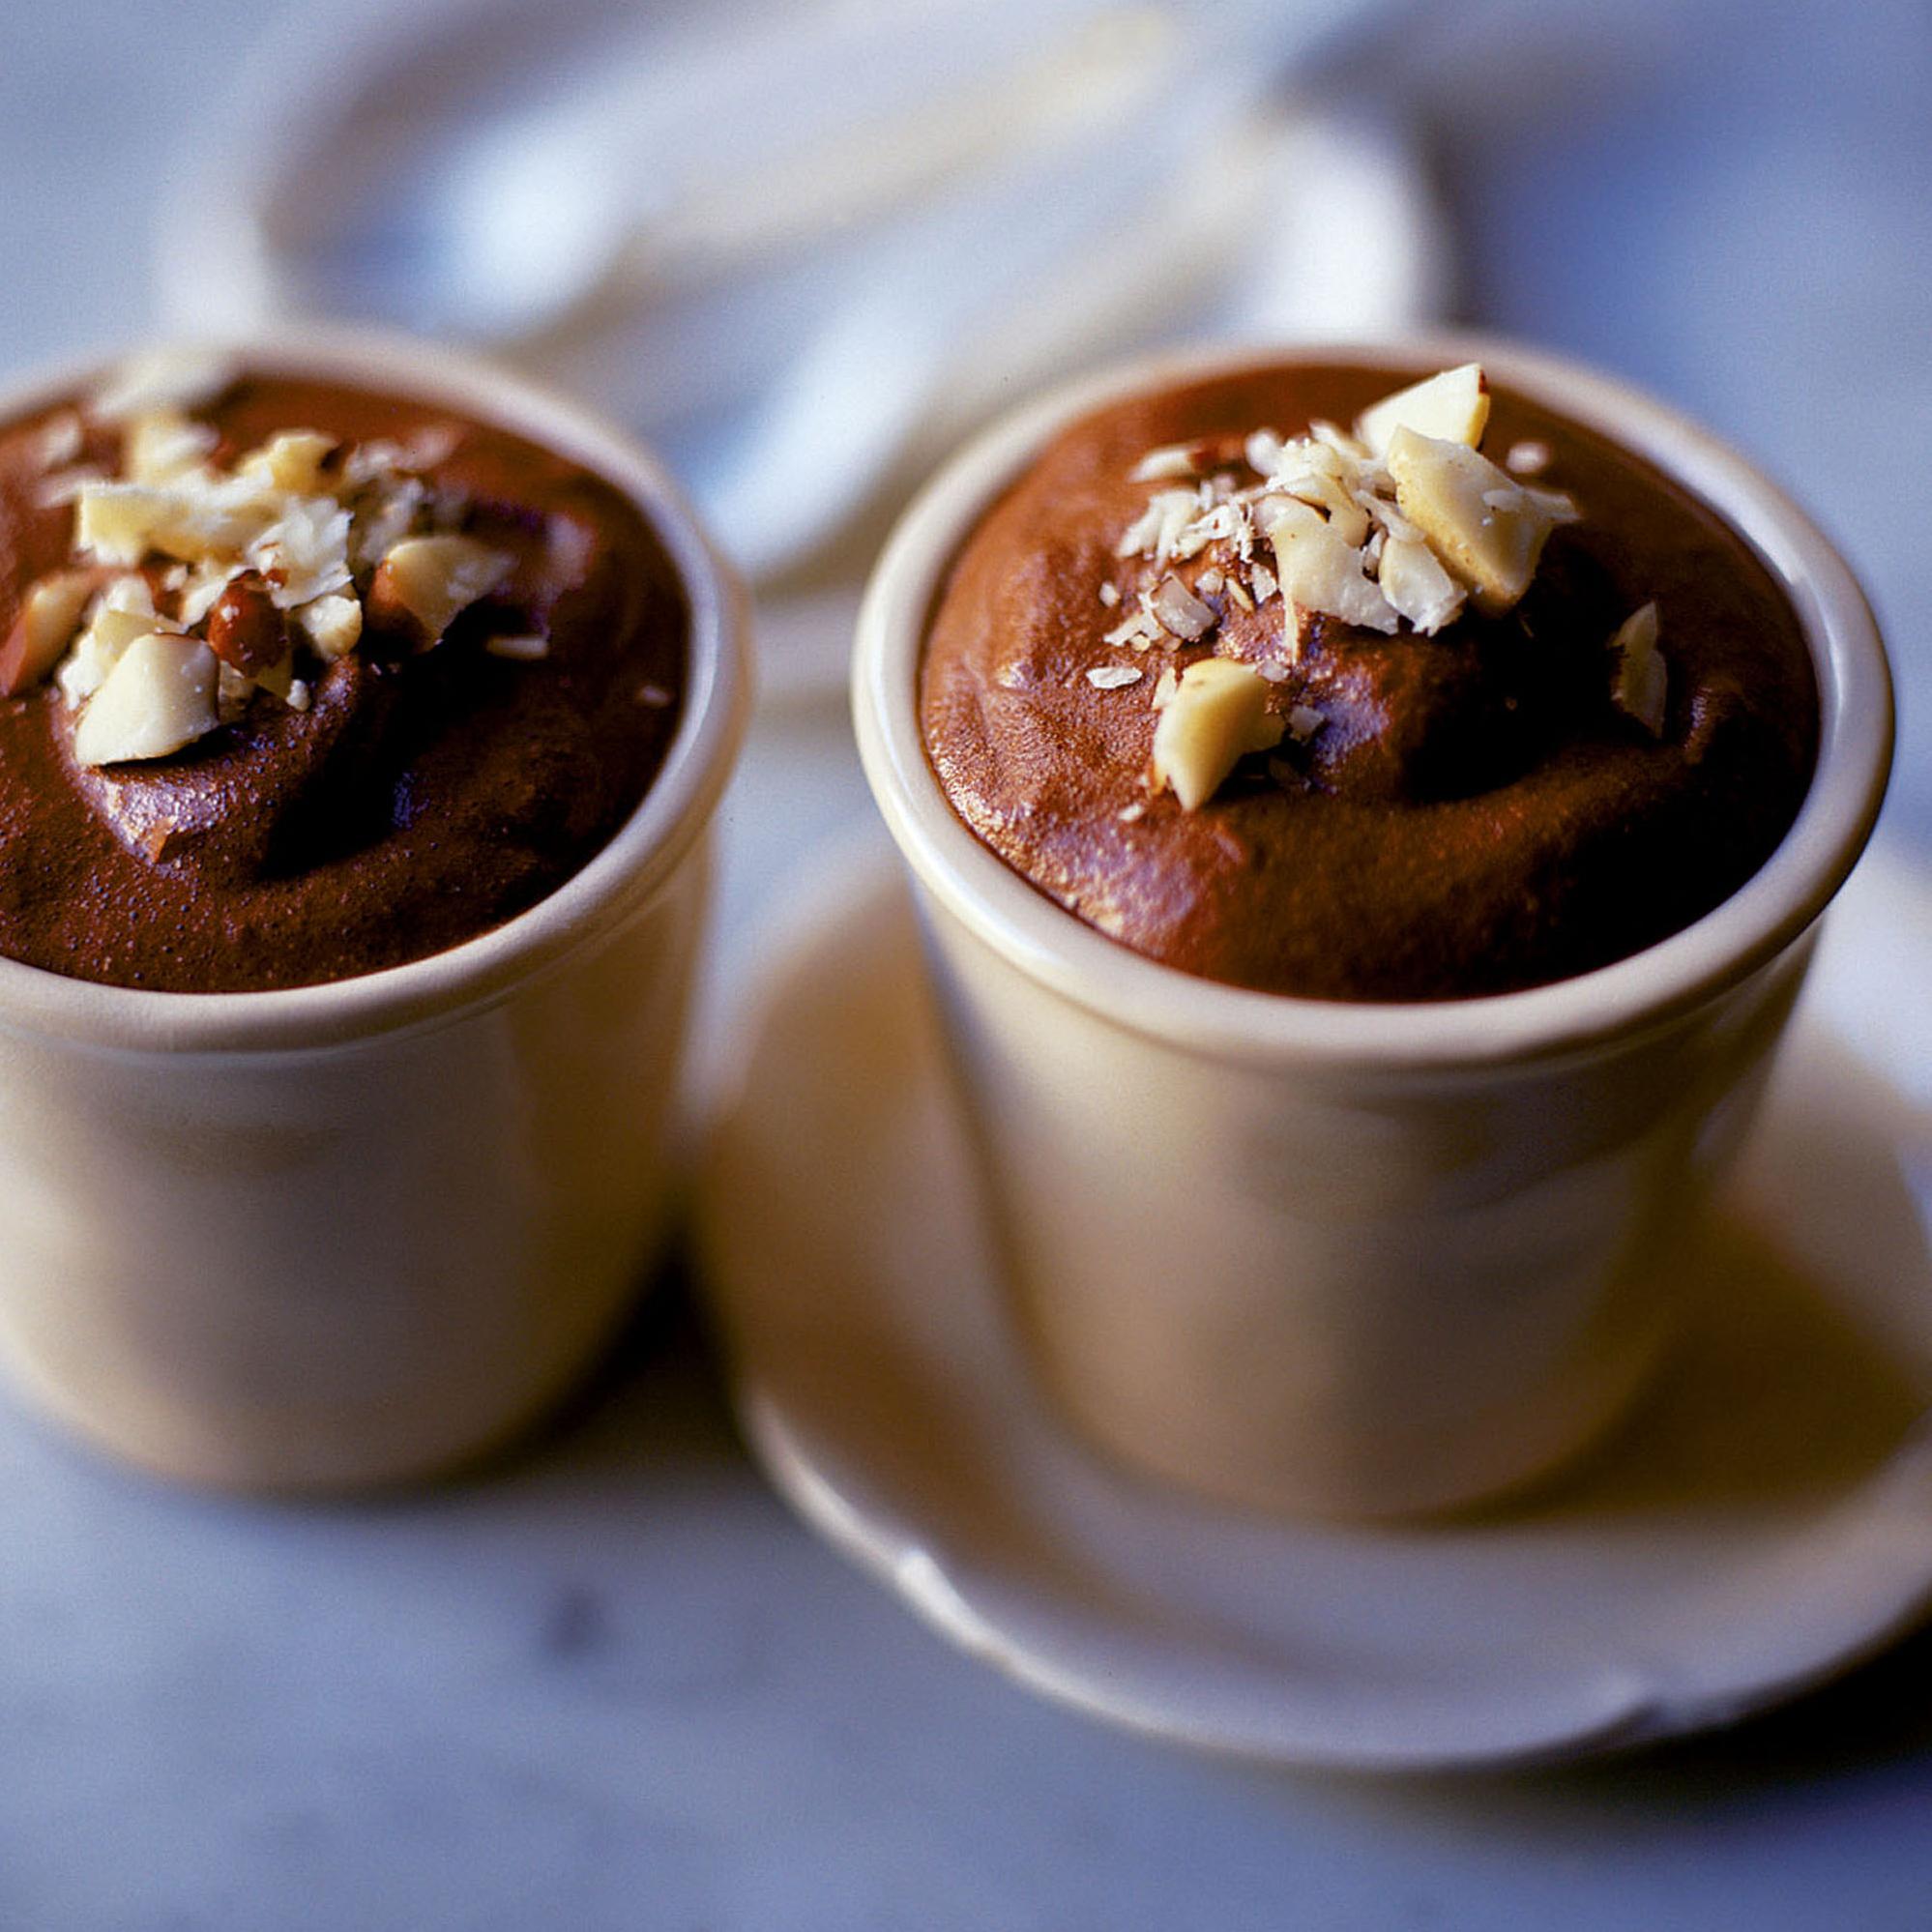  Get your fix of both coffee and chocolate in every spoonful